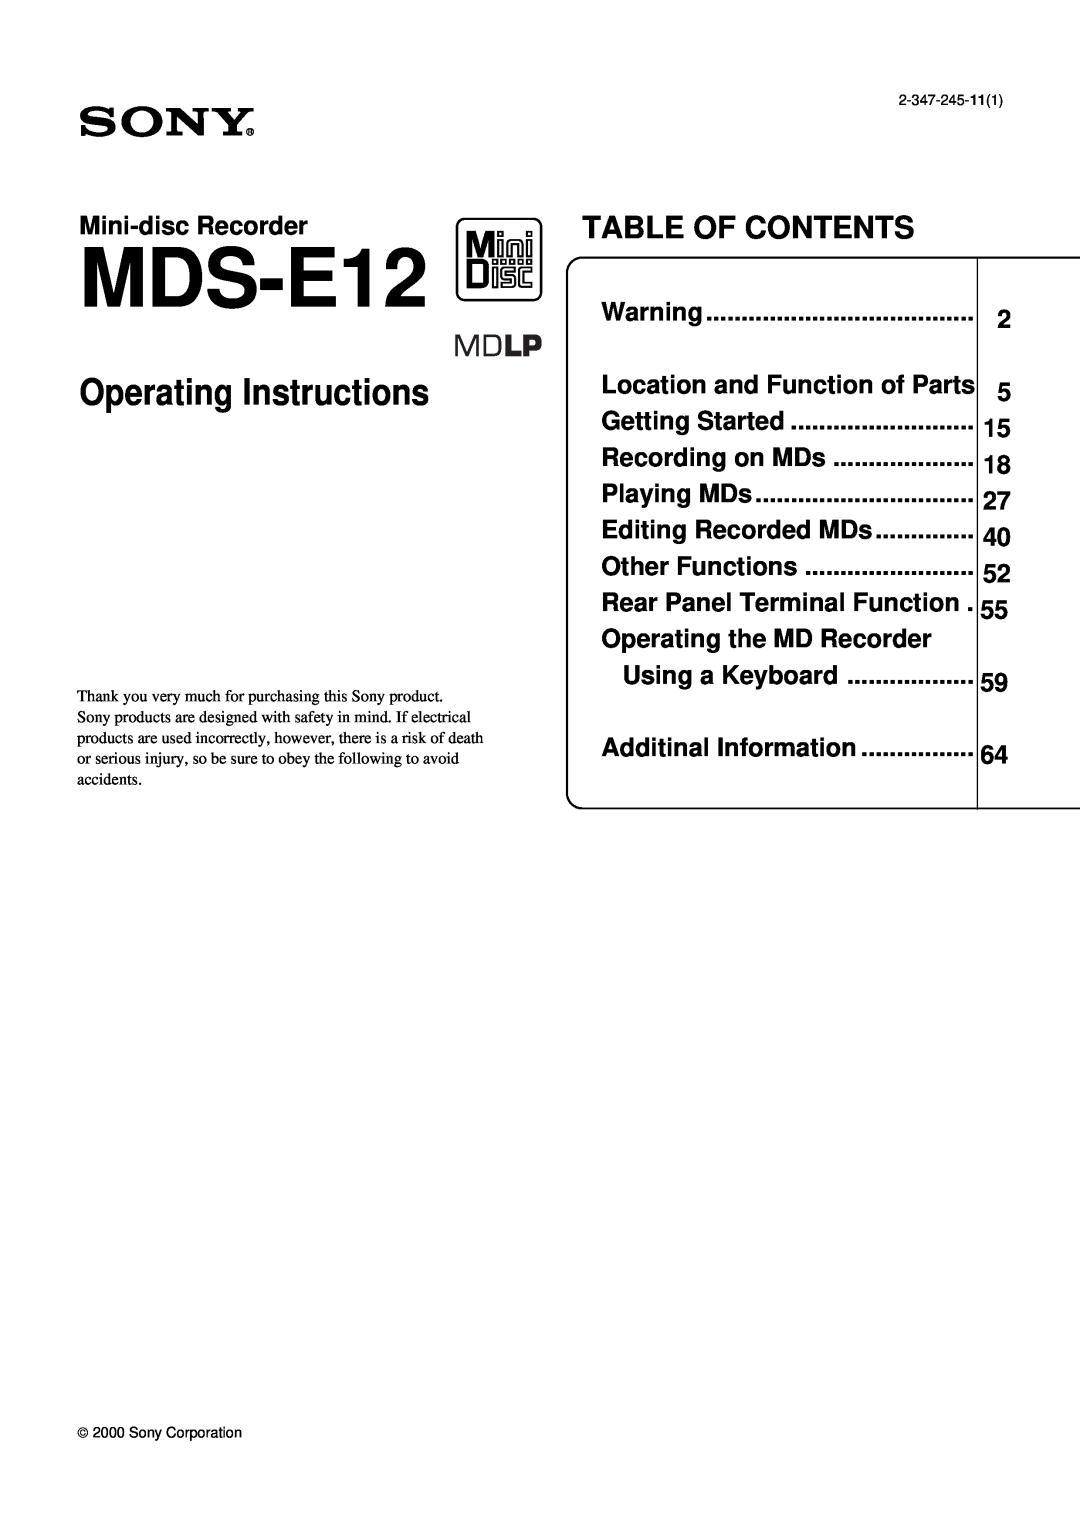 Sony MDS-E12 operating instructions Operating Instructions, Table Of Contents 